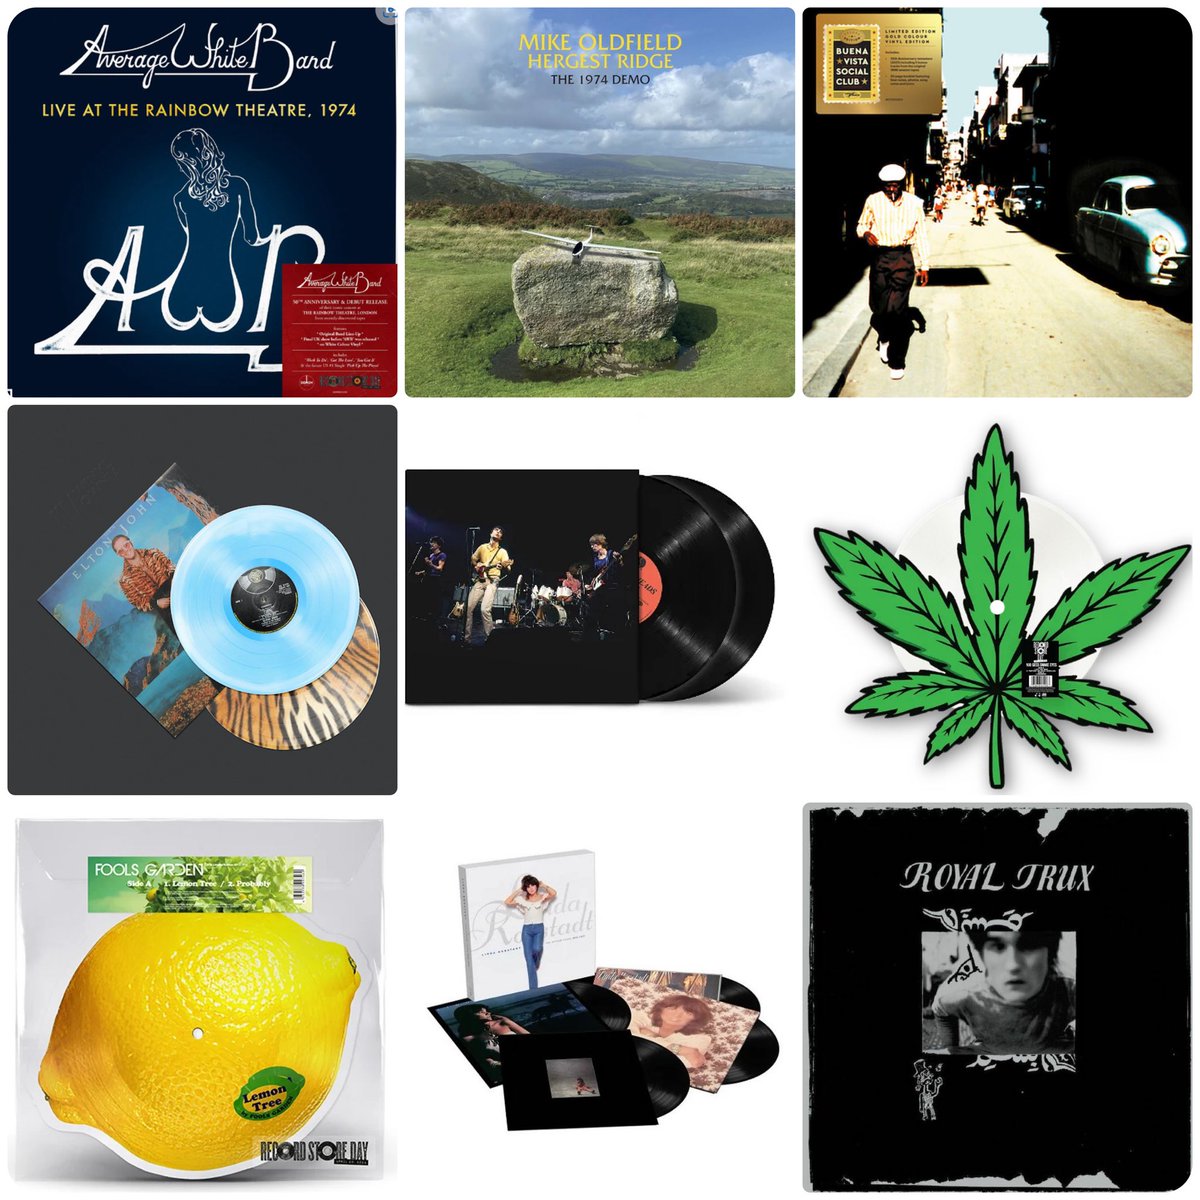 Our remaining @recordstoreday #rsd24 stock is now online! Fill yer boots / shoes / slippers / espadrilles